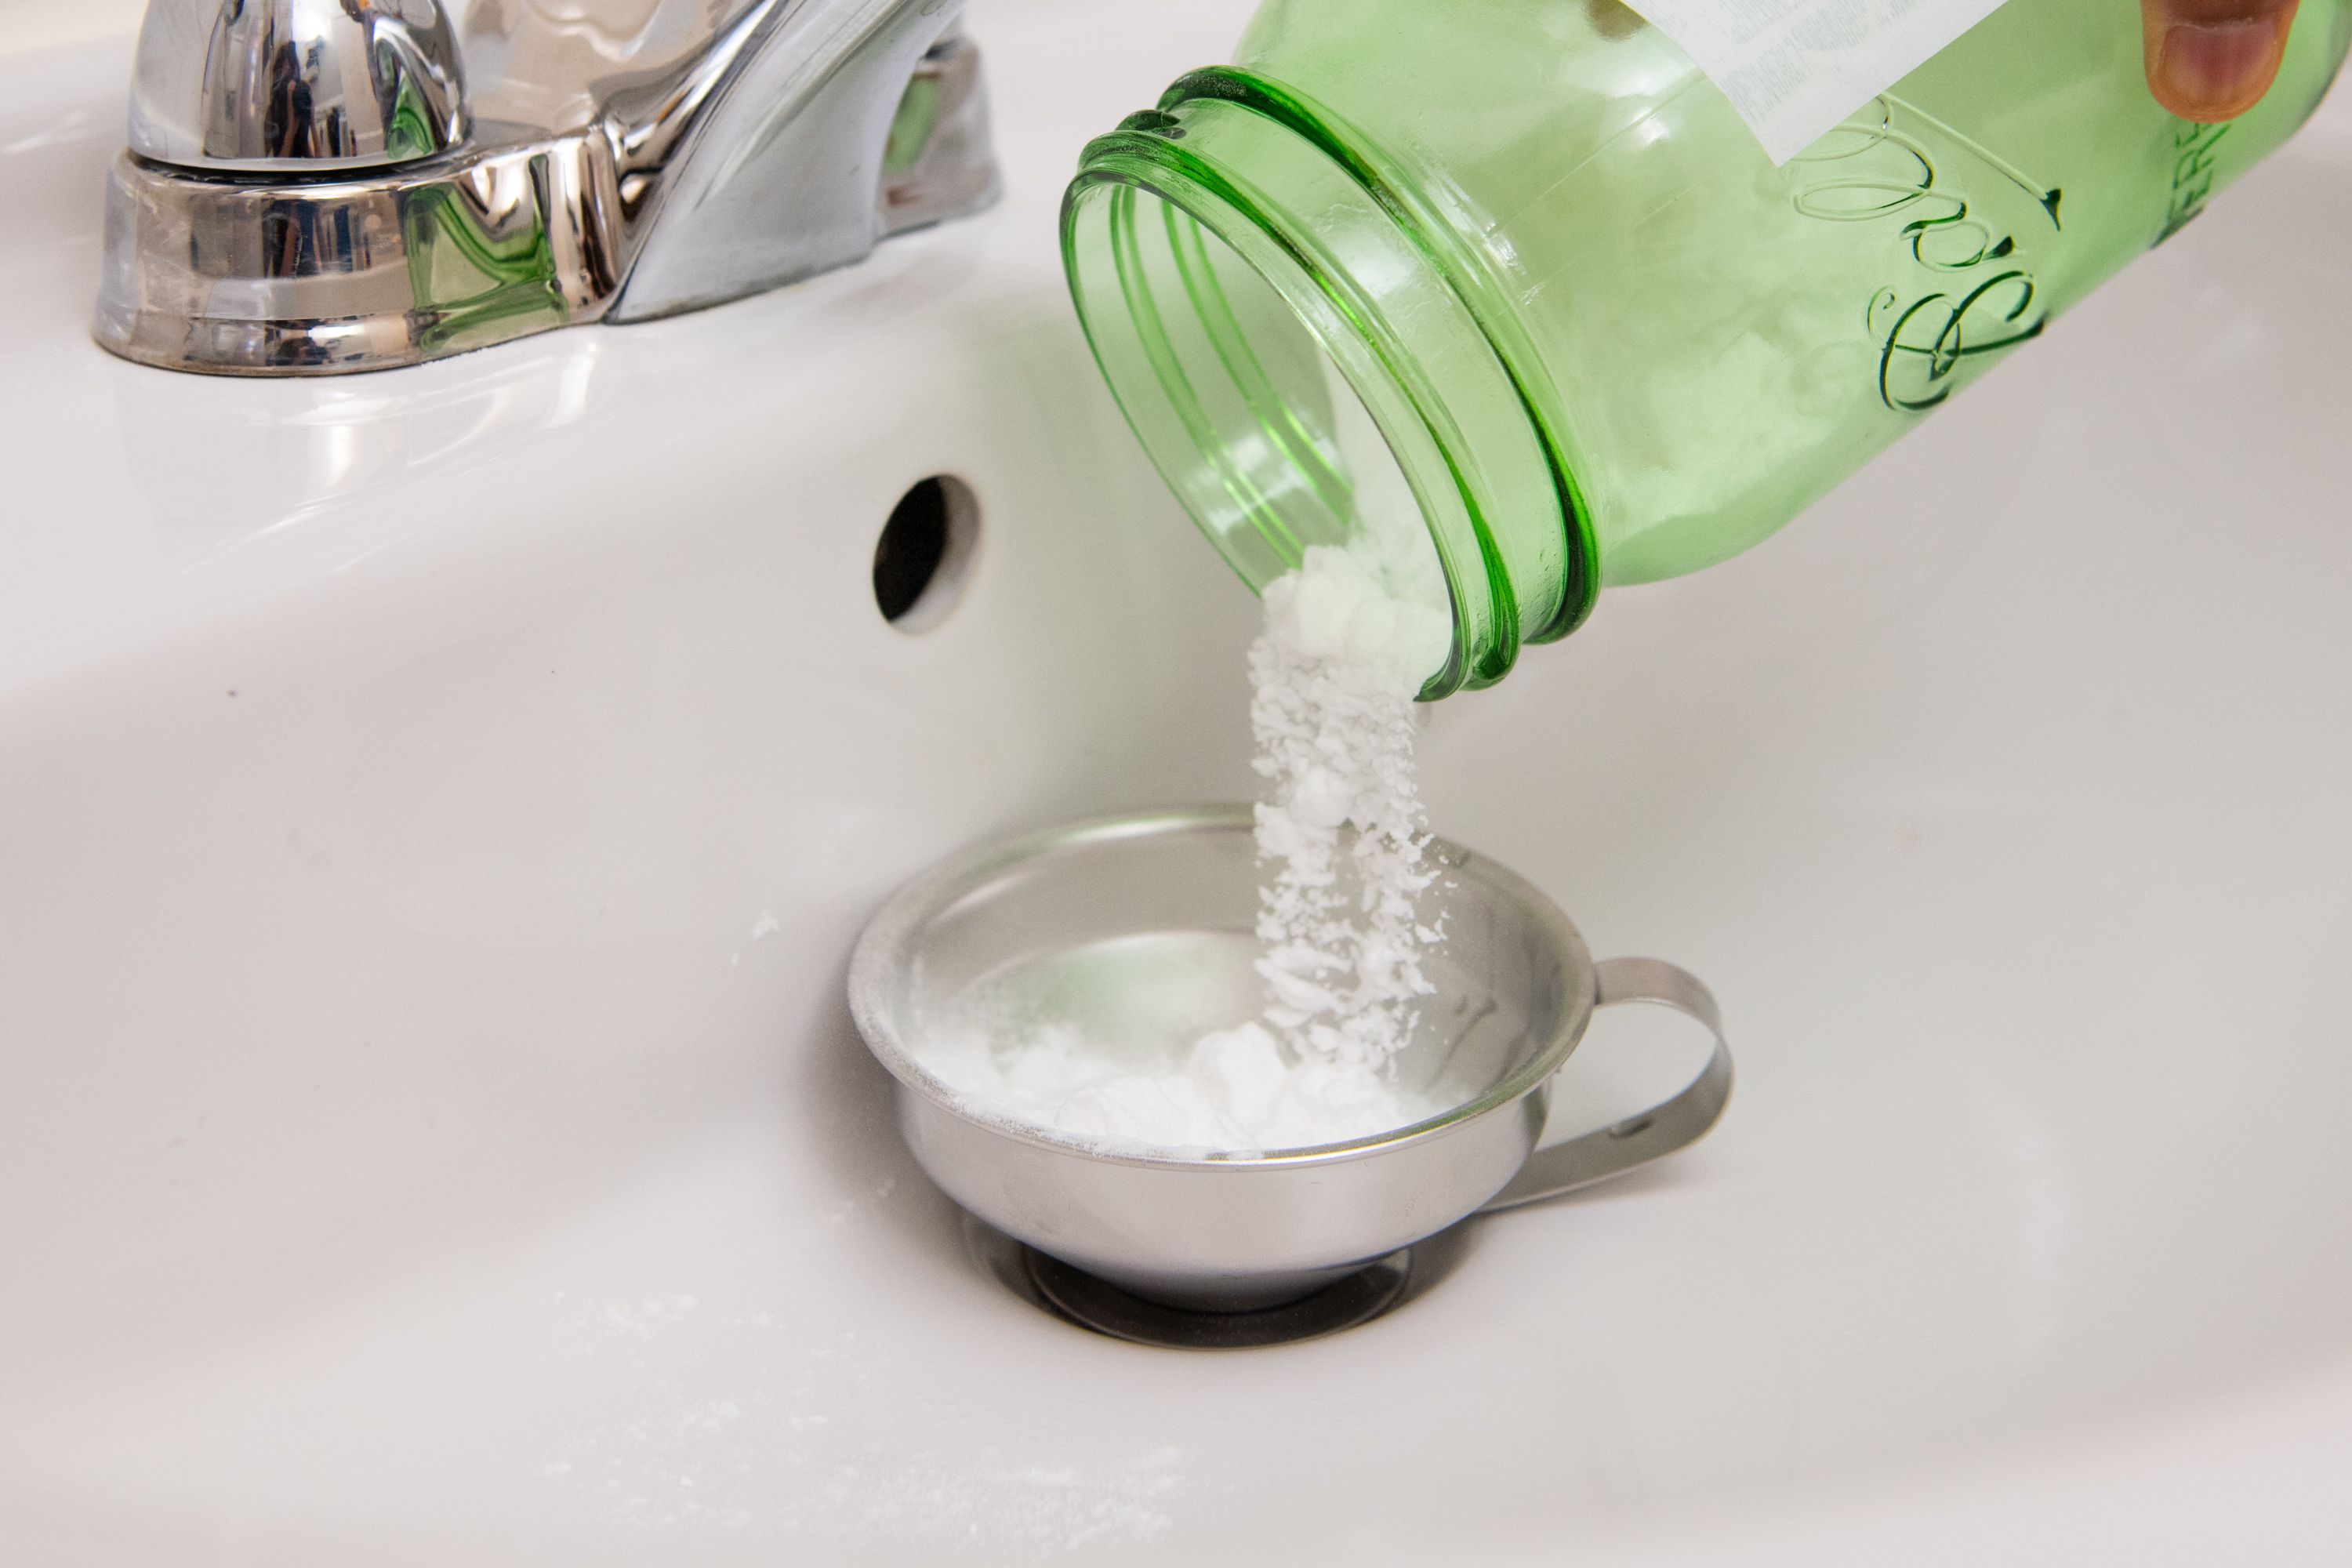 How to Freshen and Unclog a Drain With Baking Soda